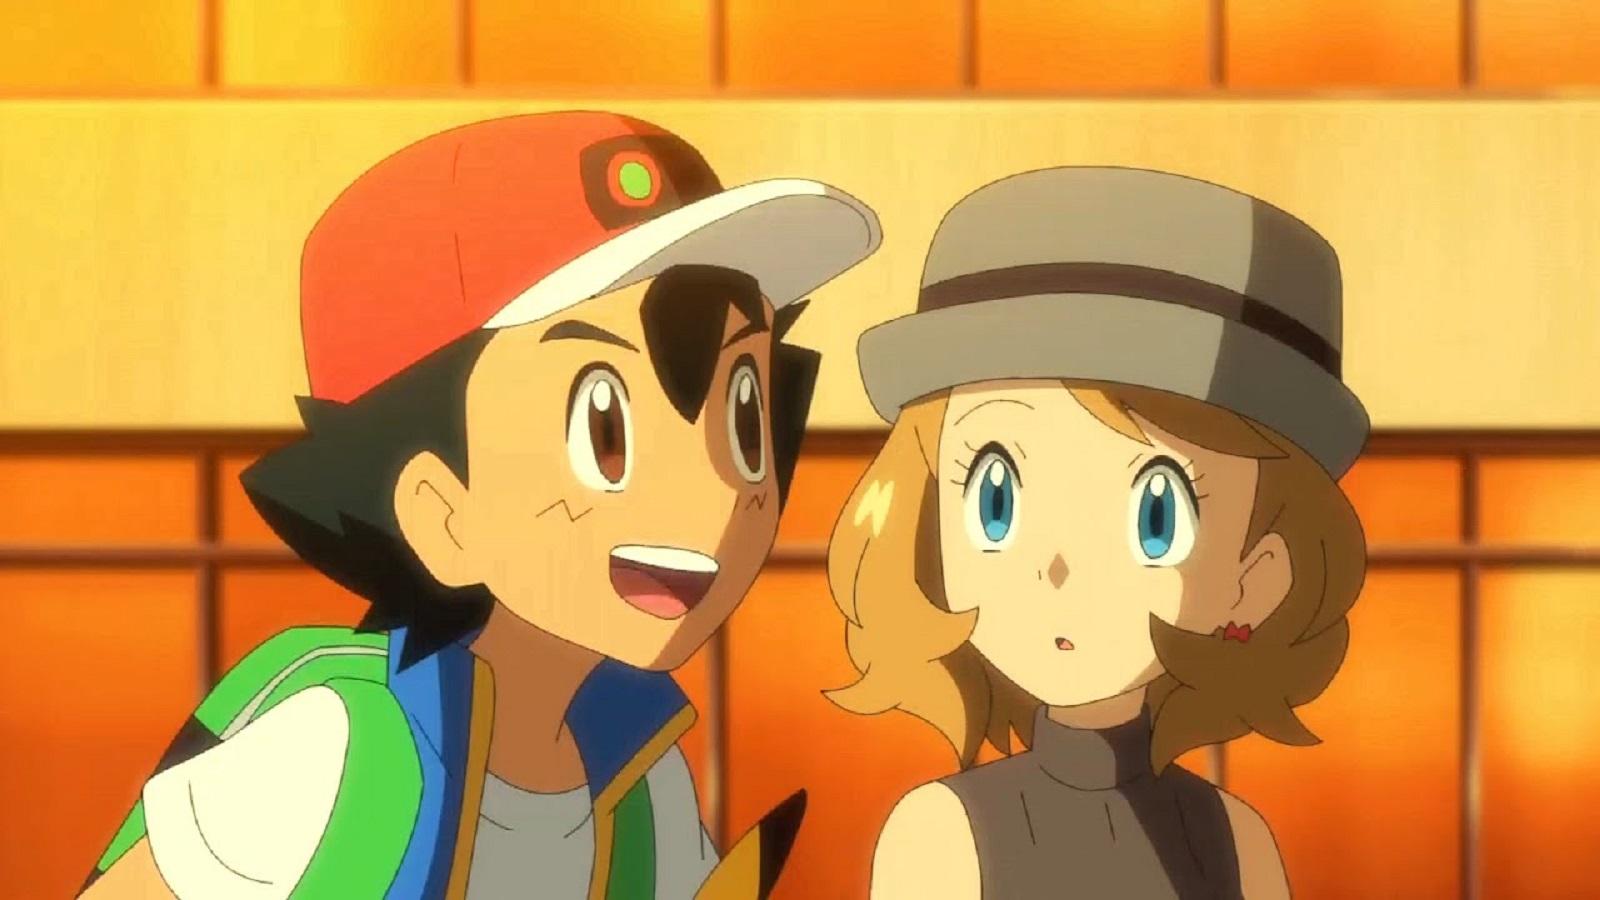 Ash From Pokemon Just Had The Battle Of His Life